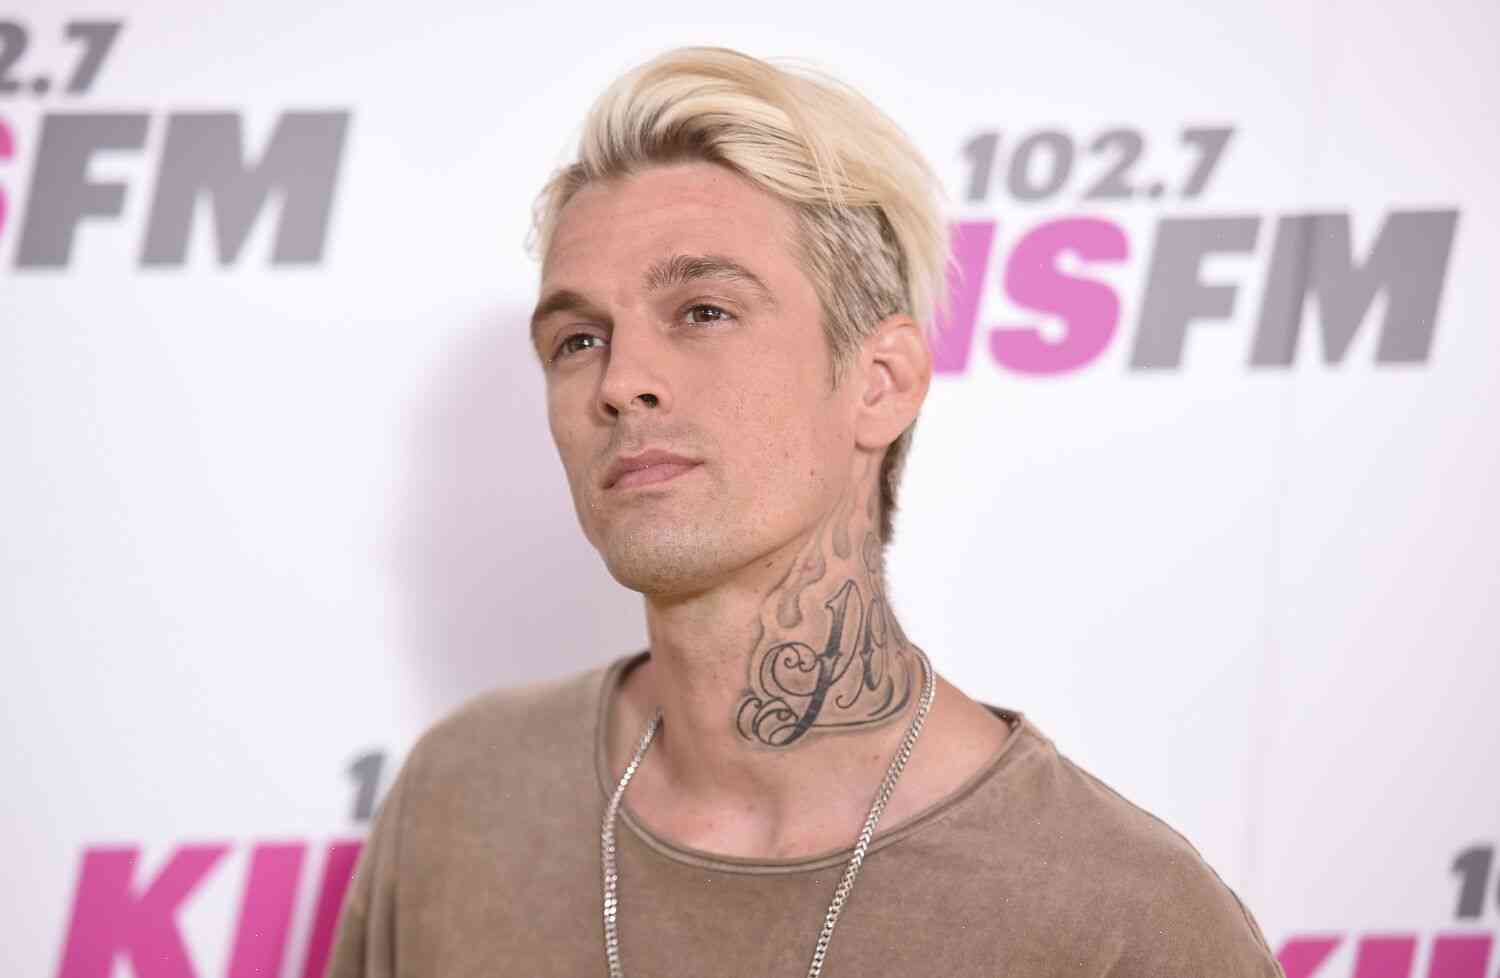 Aaron Carter died after being taunted with death threats on social media